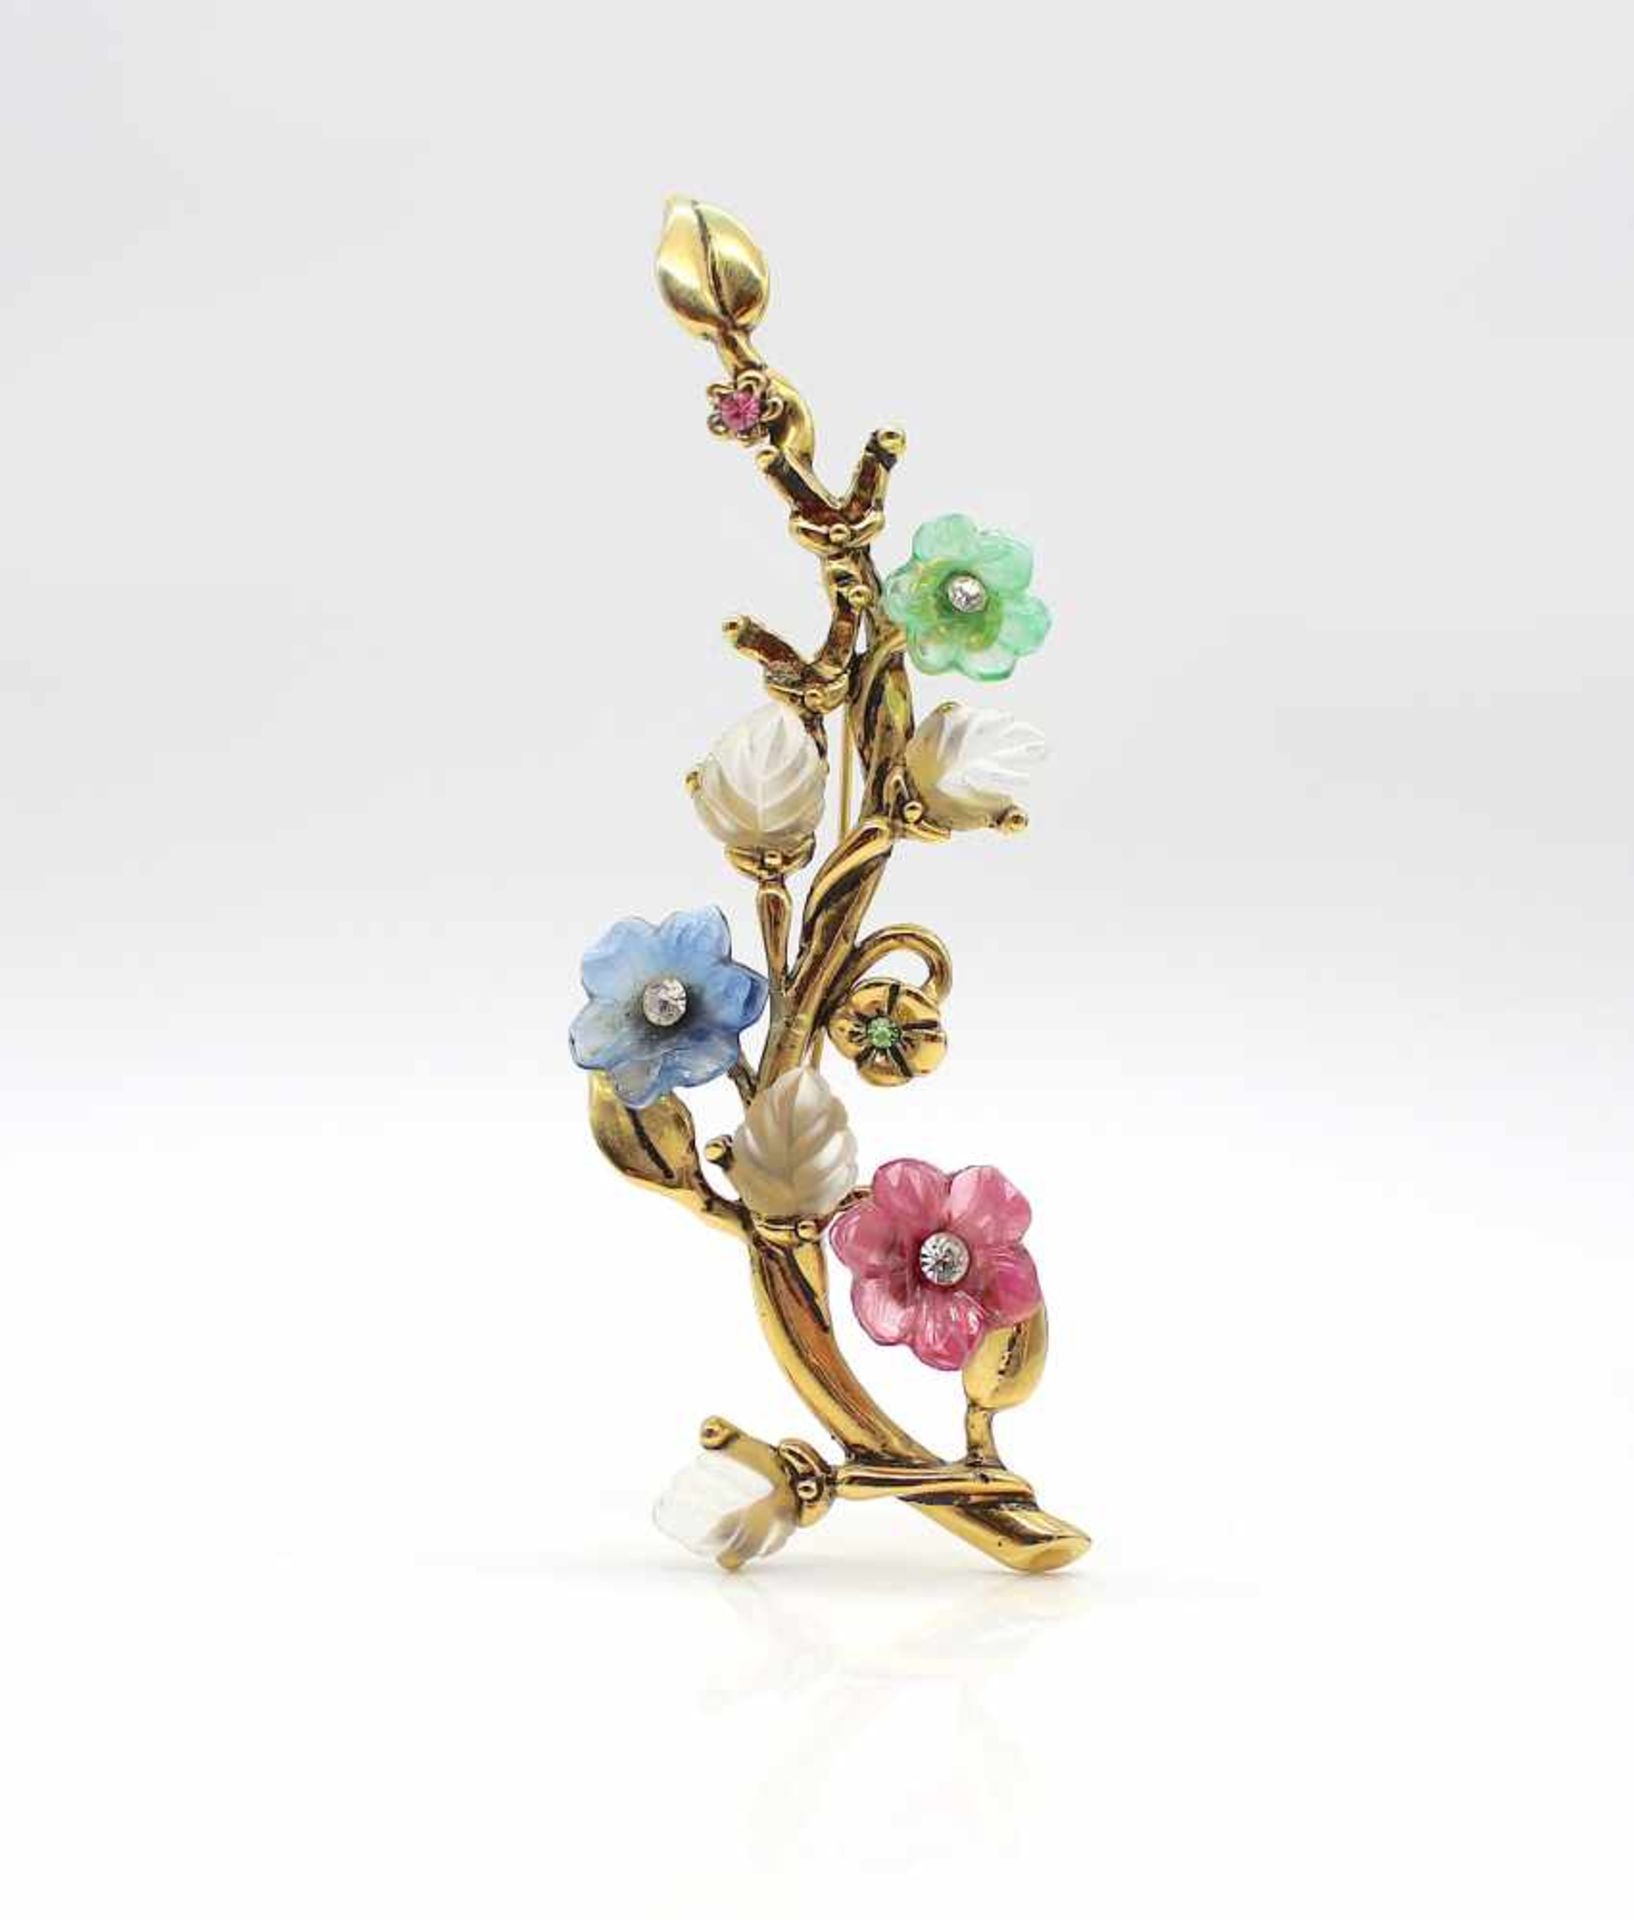 1 brooch costume jewellery with artificial glass.length 11,5 cm- - -15.00 % buyer's premium on the - Bild 2 aus 3